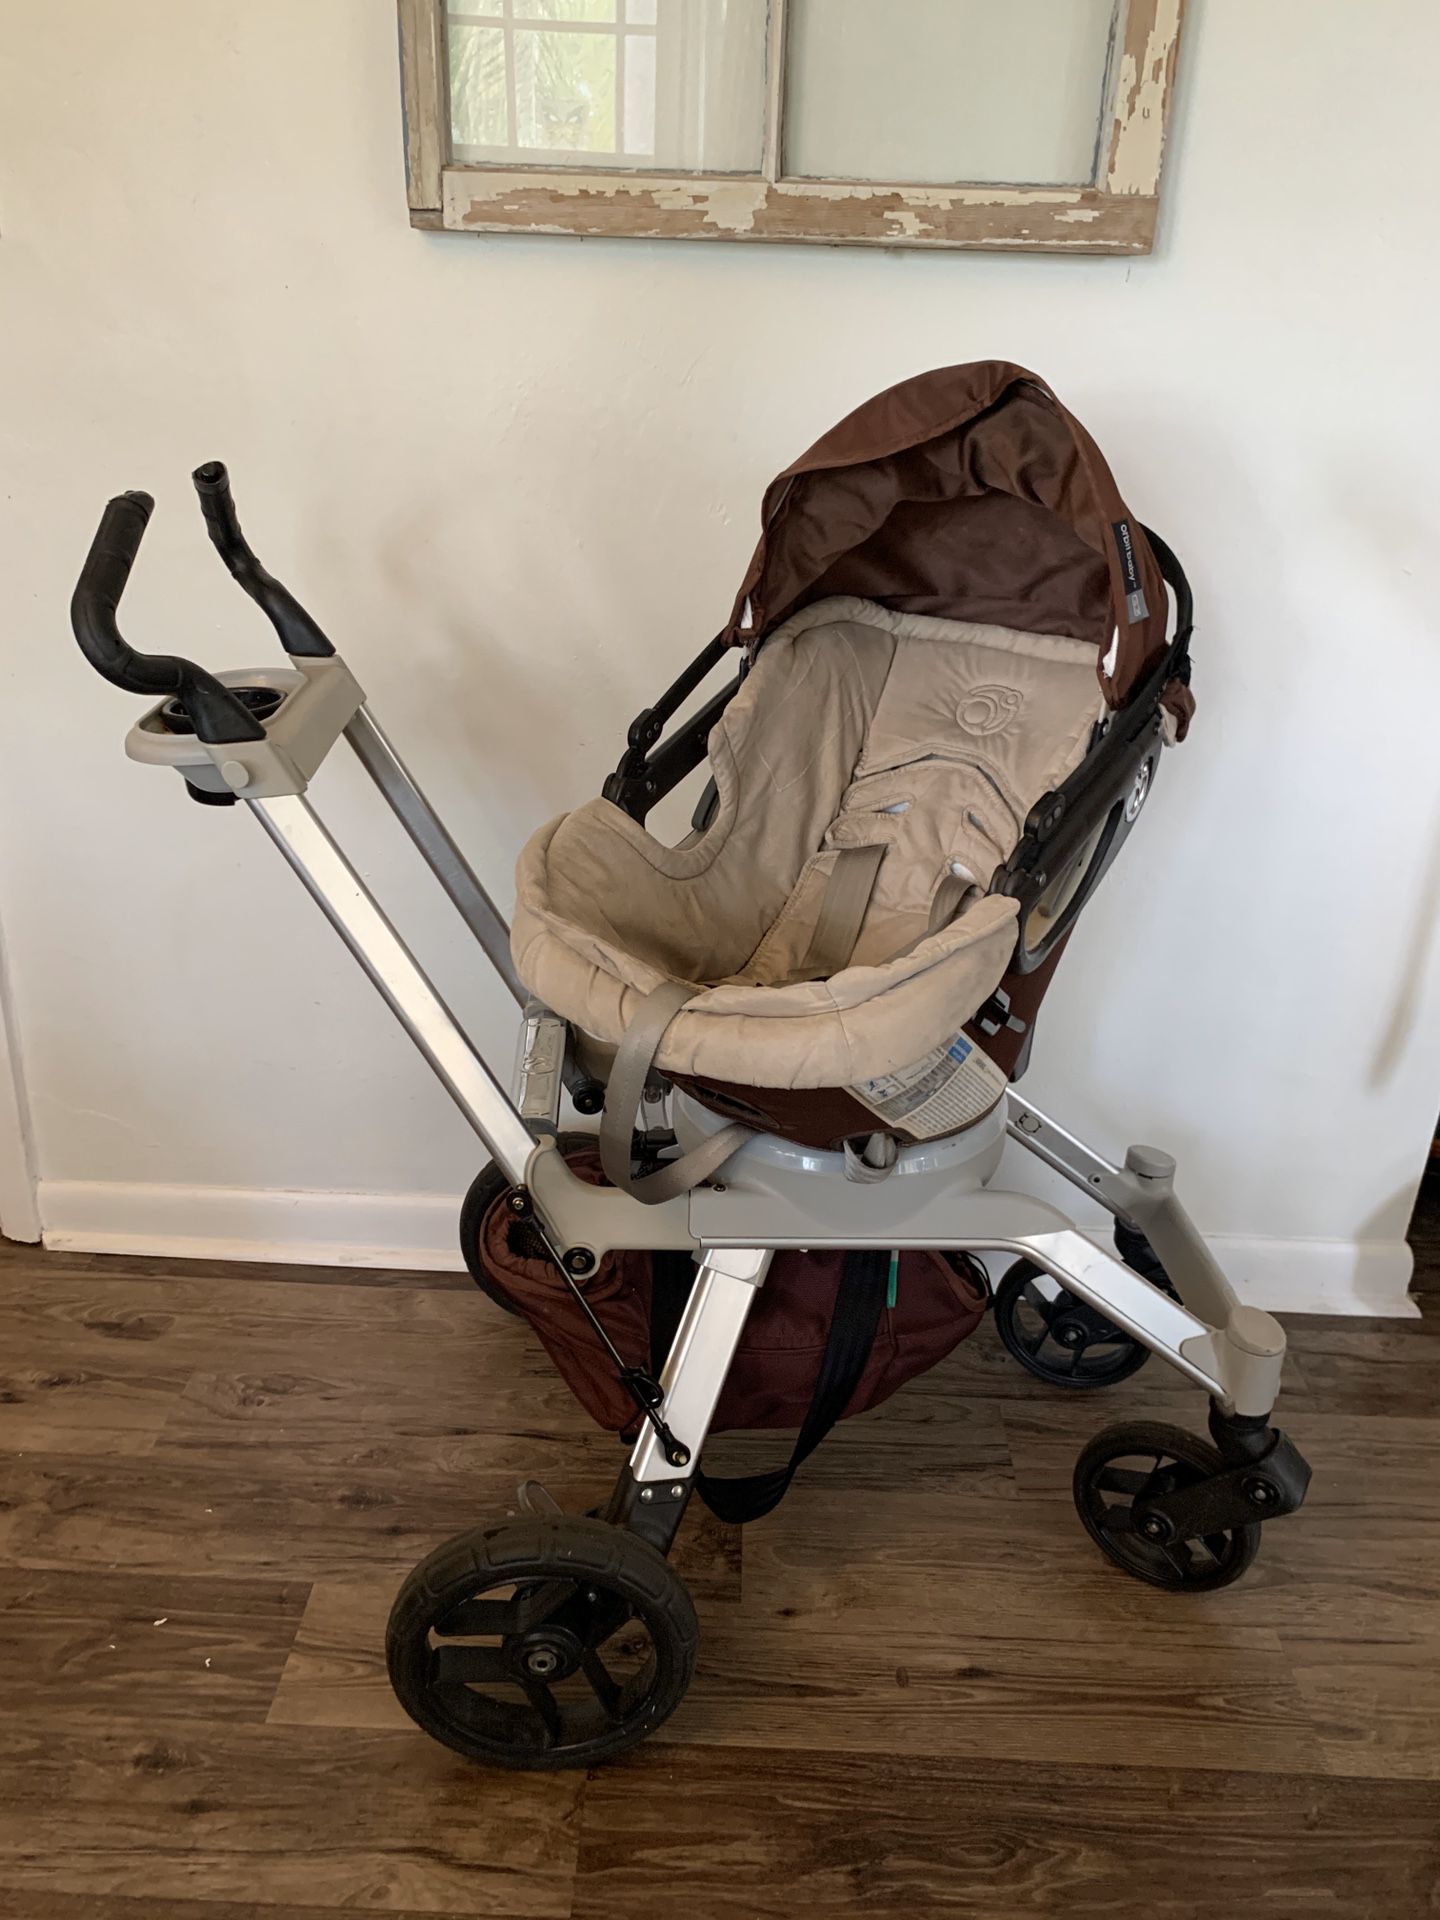 Orbit Baby infant seat and Stroller